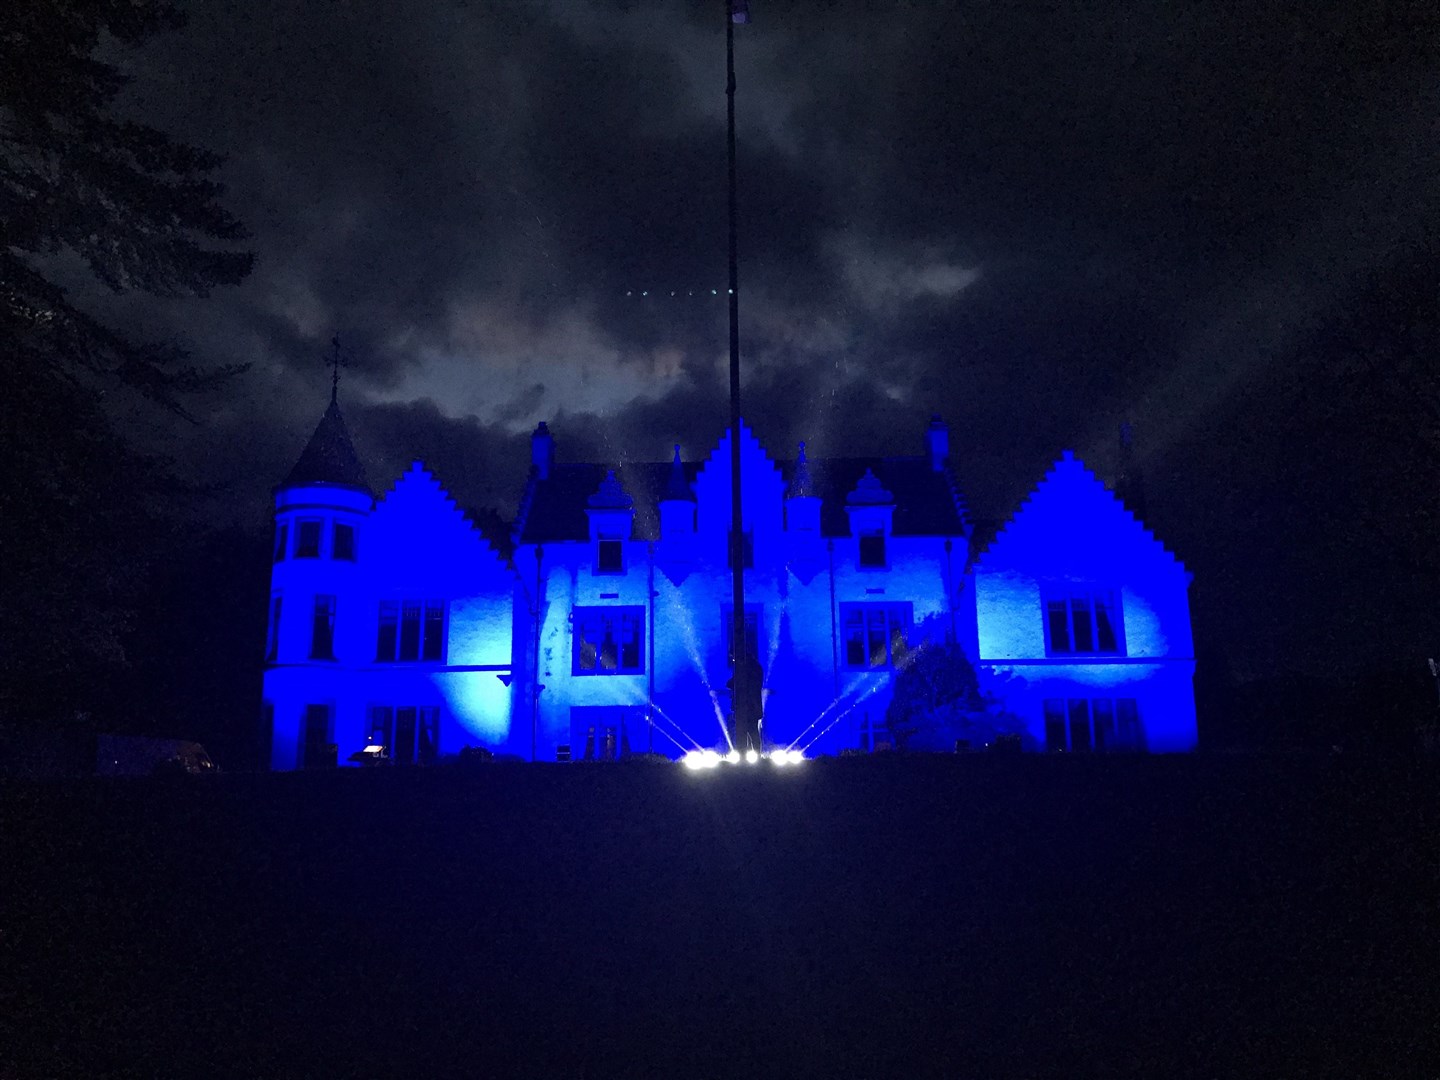 Kincraig Castle Hotel turned blue for the NHS earlier this month as part of a Ross-shire 'trail' created by Invergordon-based Prism Event Lighting.